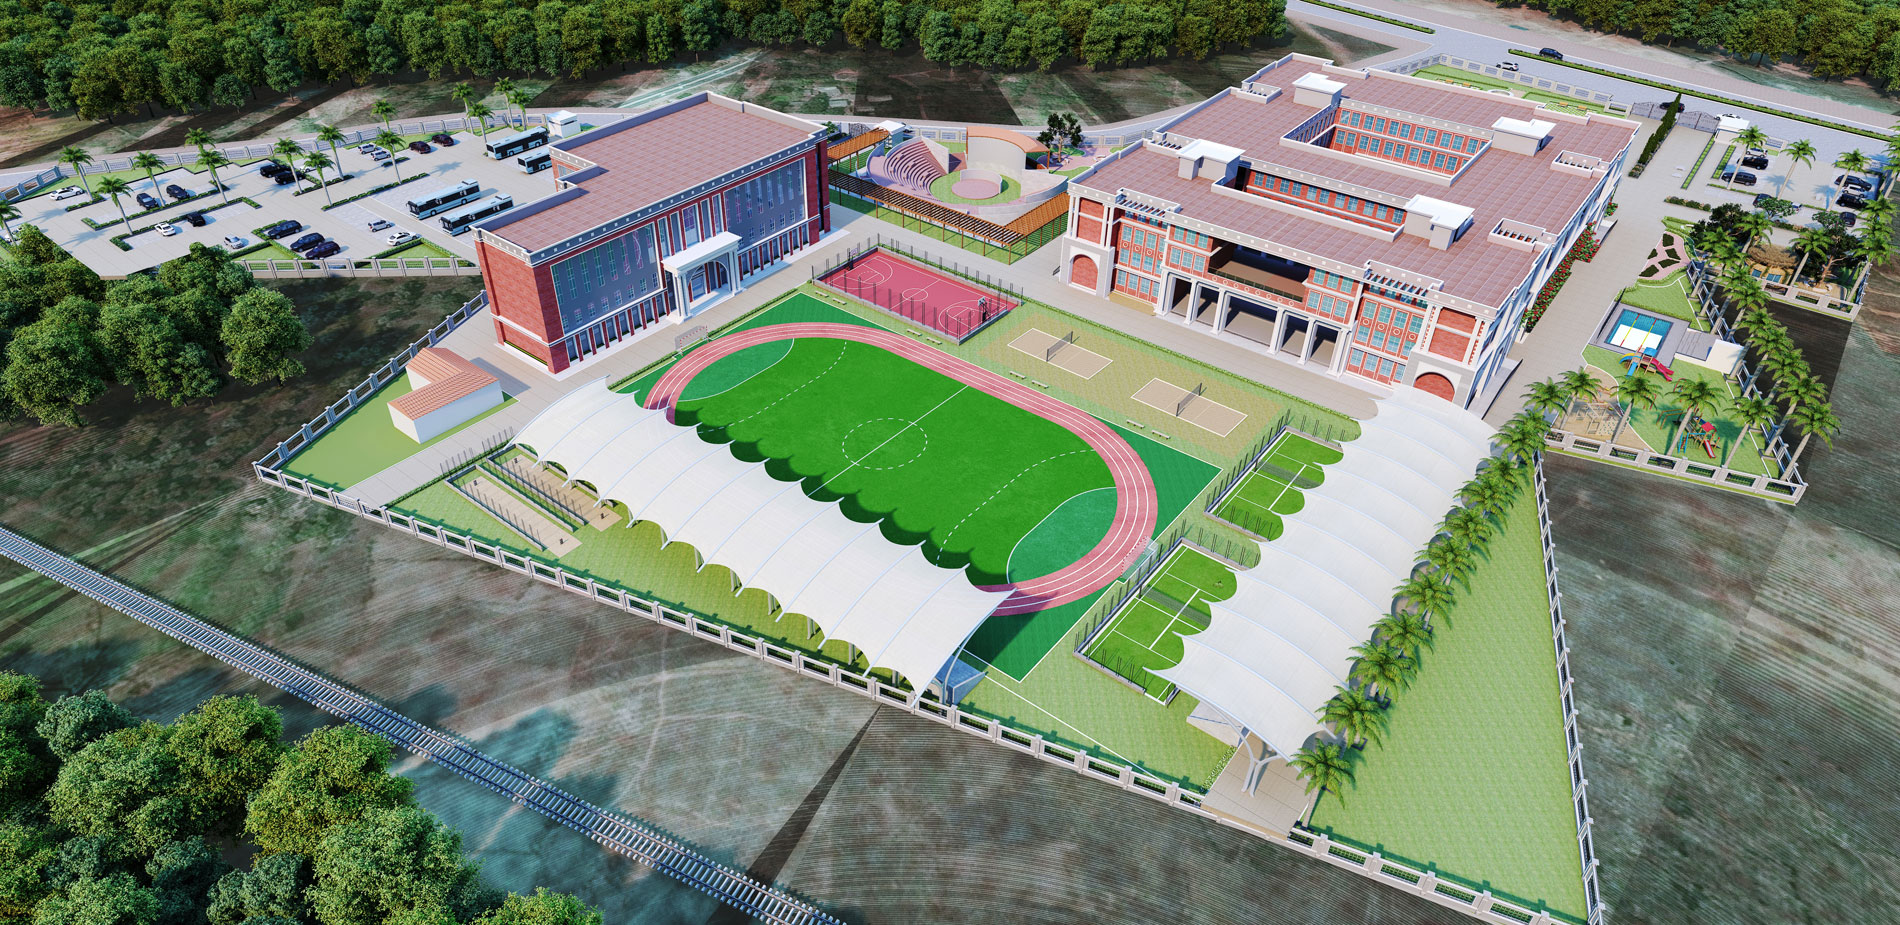 INDIA’S BEST SCHOOL ARCHITECTURE SERVICES